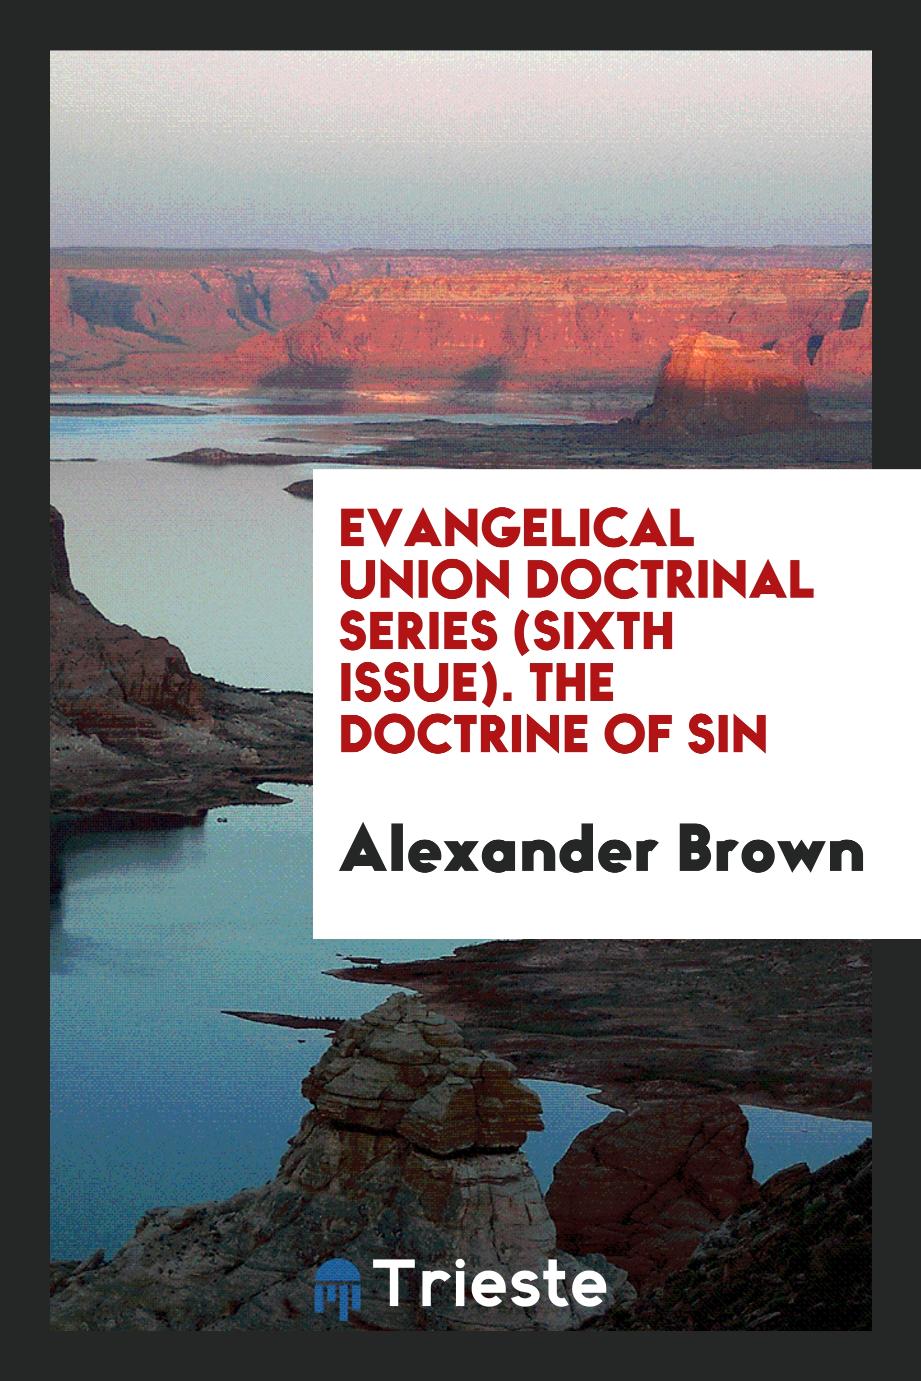 Evangelical Union Doctrinal Series (Sixth Issue). The doctrine of Sin